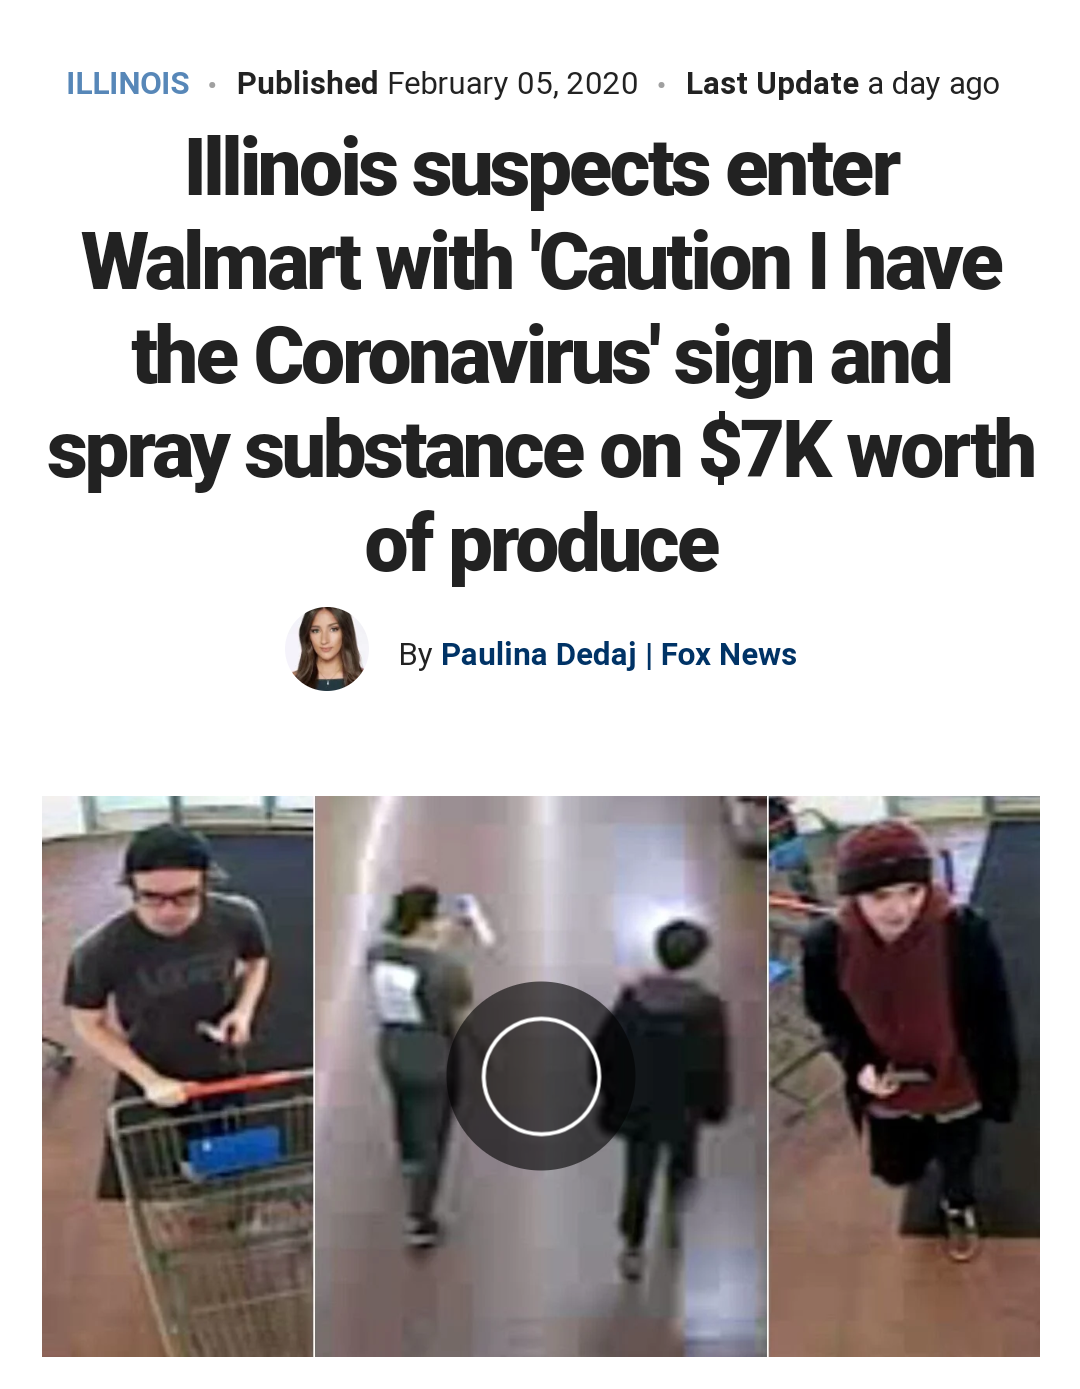 communication - Illinois. Published Last Update a day ago Illinois suspects enter Walmart with 'Caution I have the Coronavirus' sign and spray substance on $7K worth of produce By Paulina Dedaj | Fox News